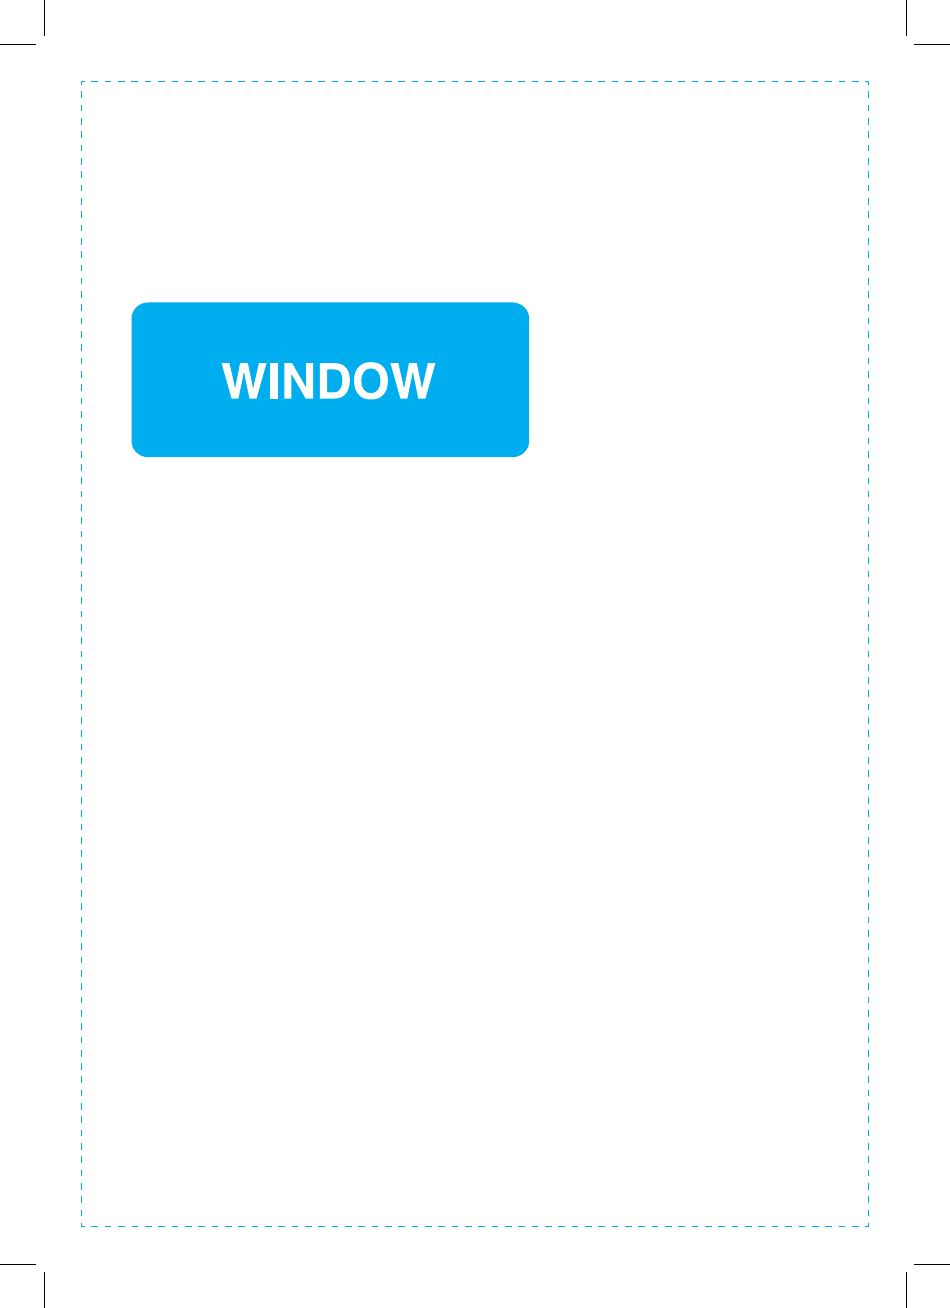 Envelope Template (With Window) - Blue, Page 1